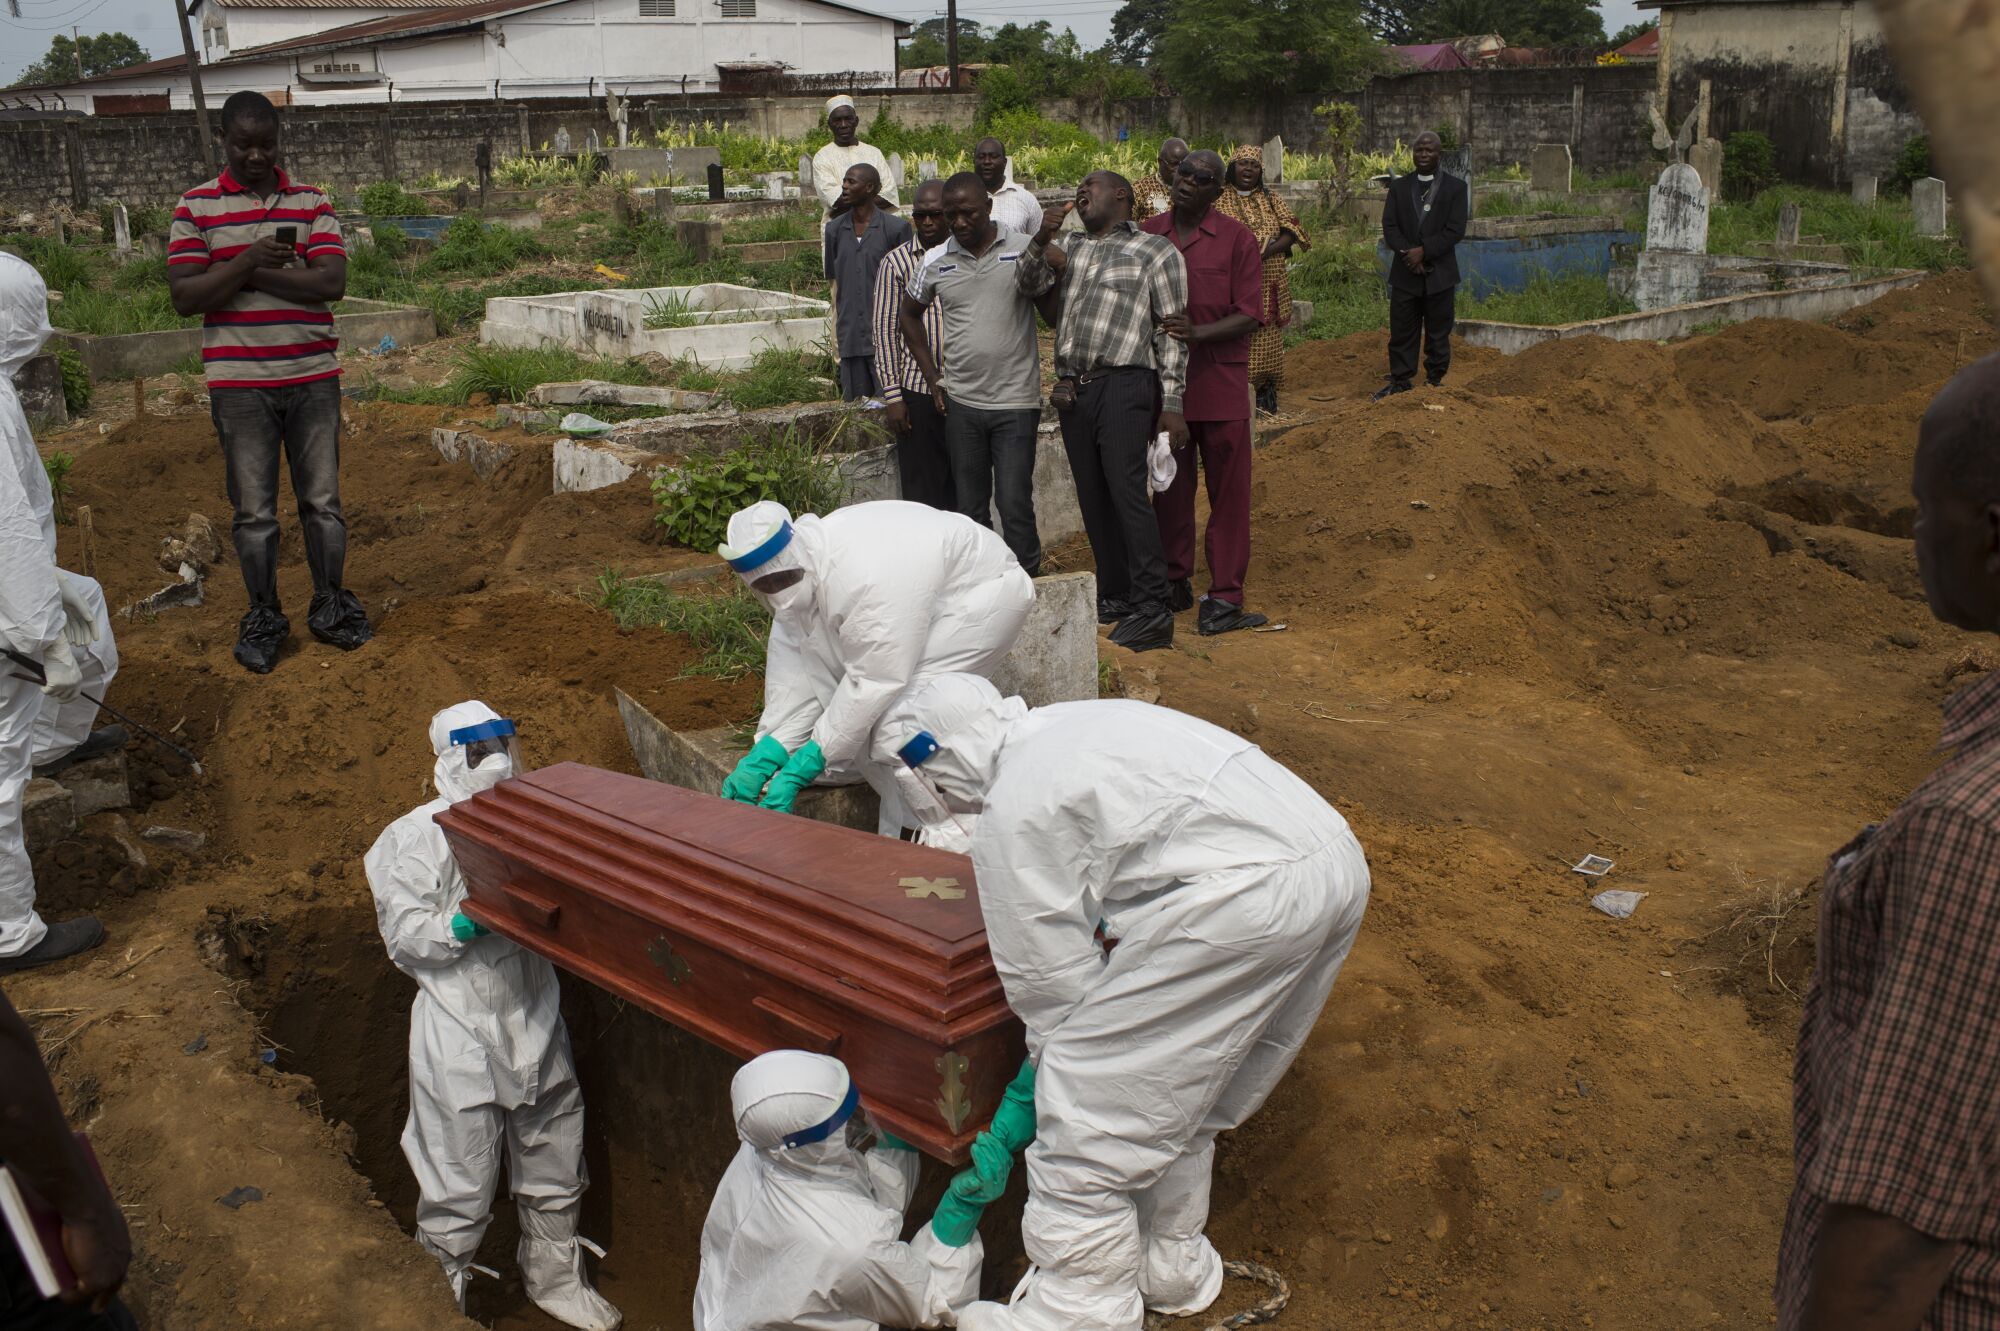 Workers in hazmat suits lower a coffin into a grave in Freetown, Sierra Leone, in 2014.